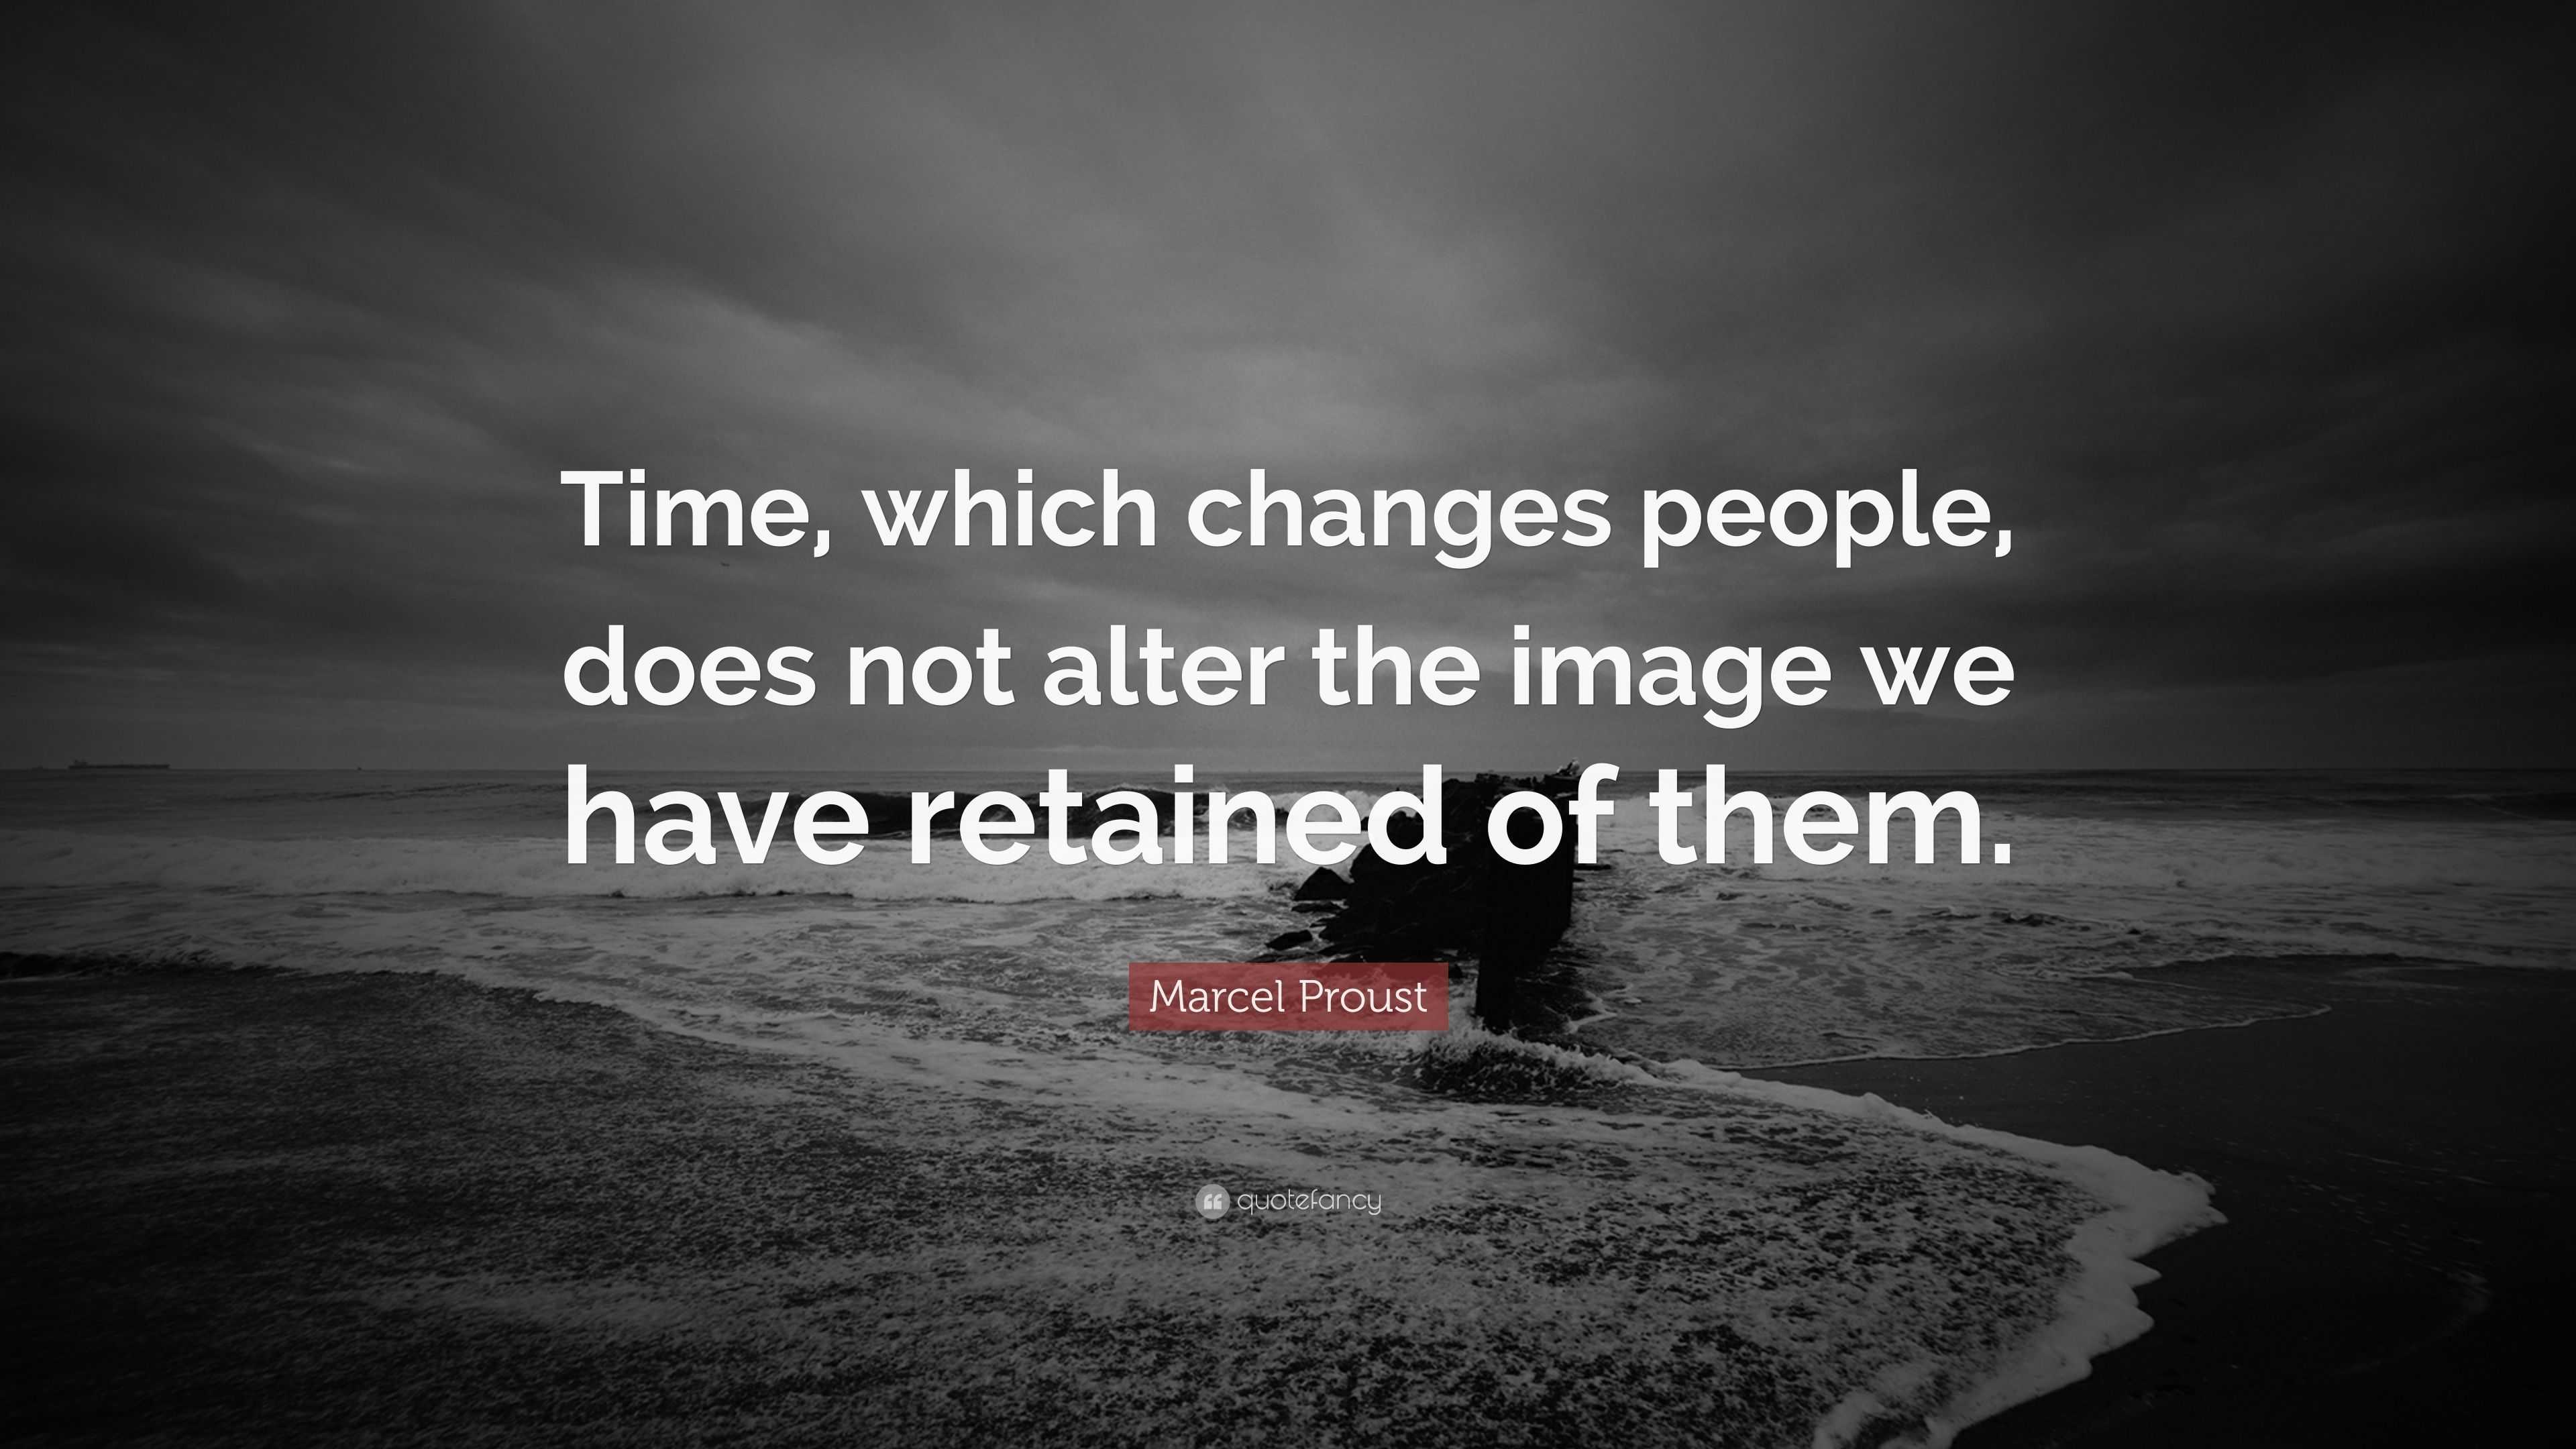 Marcel Proust Quote: “Time, which changes people, does not alter the ...